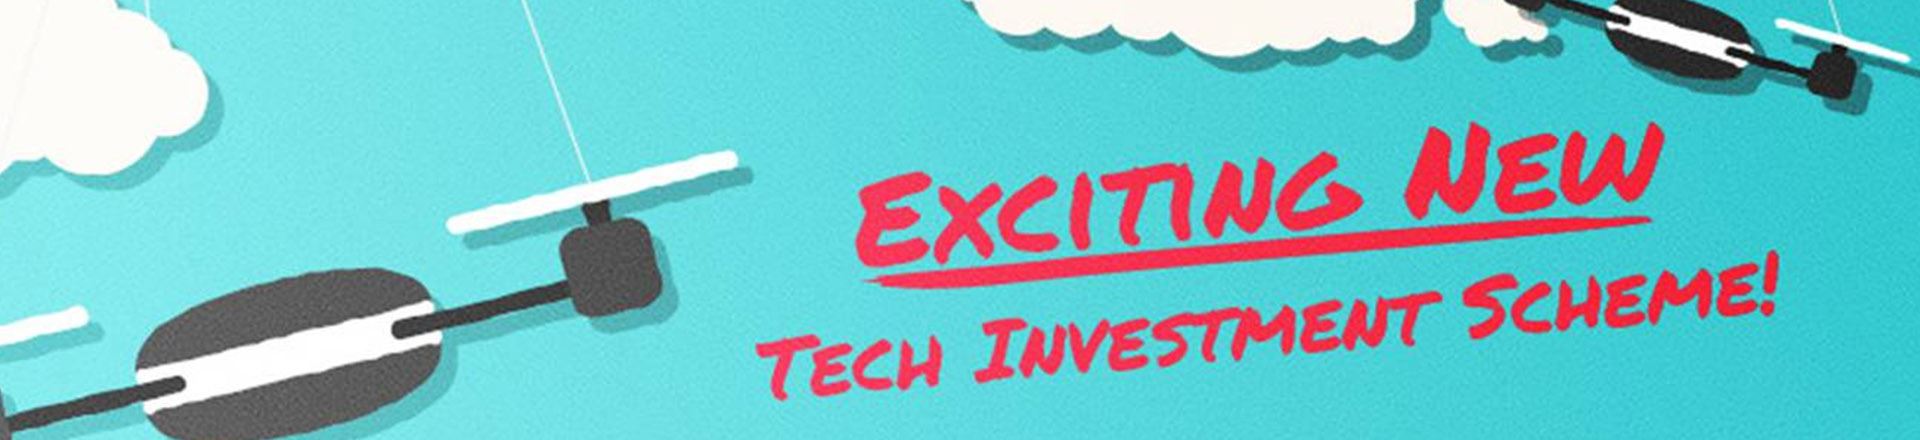 techinvest-banner